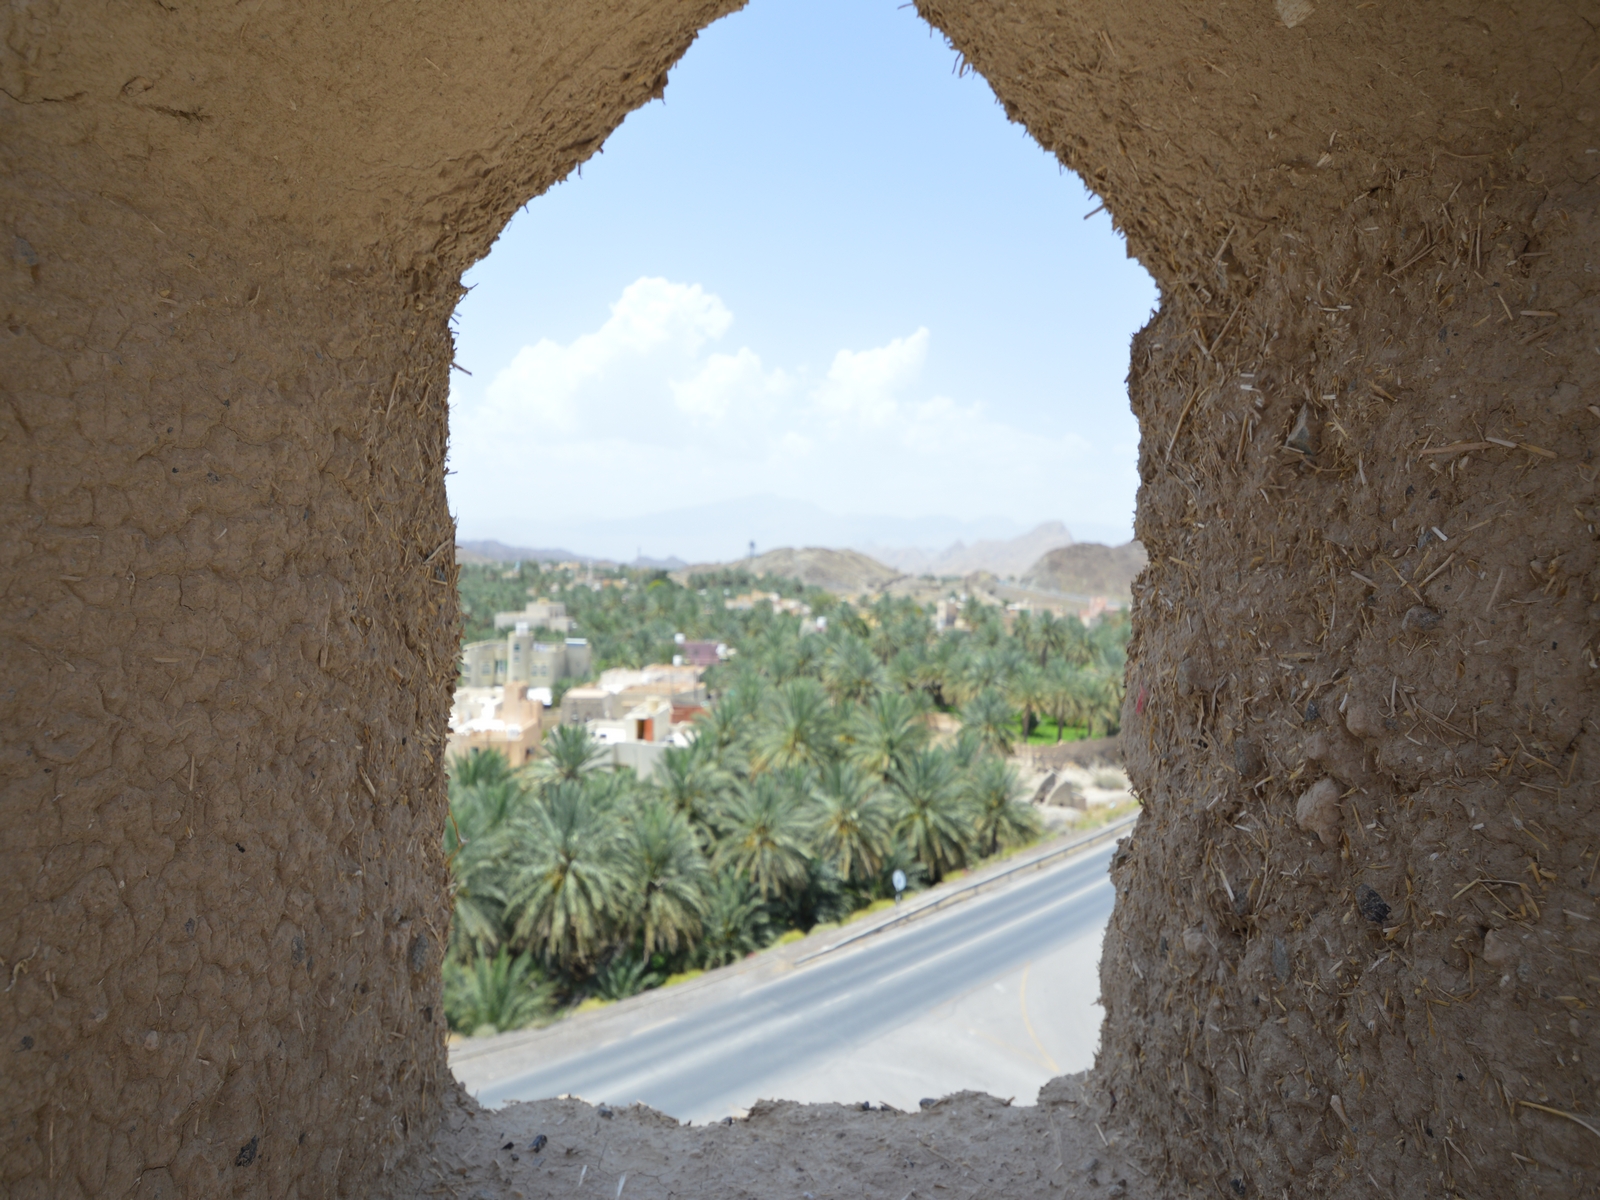 Bahla is probably the most established town in the Sultanate 25